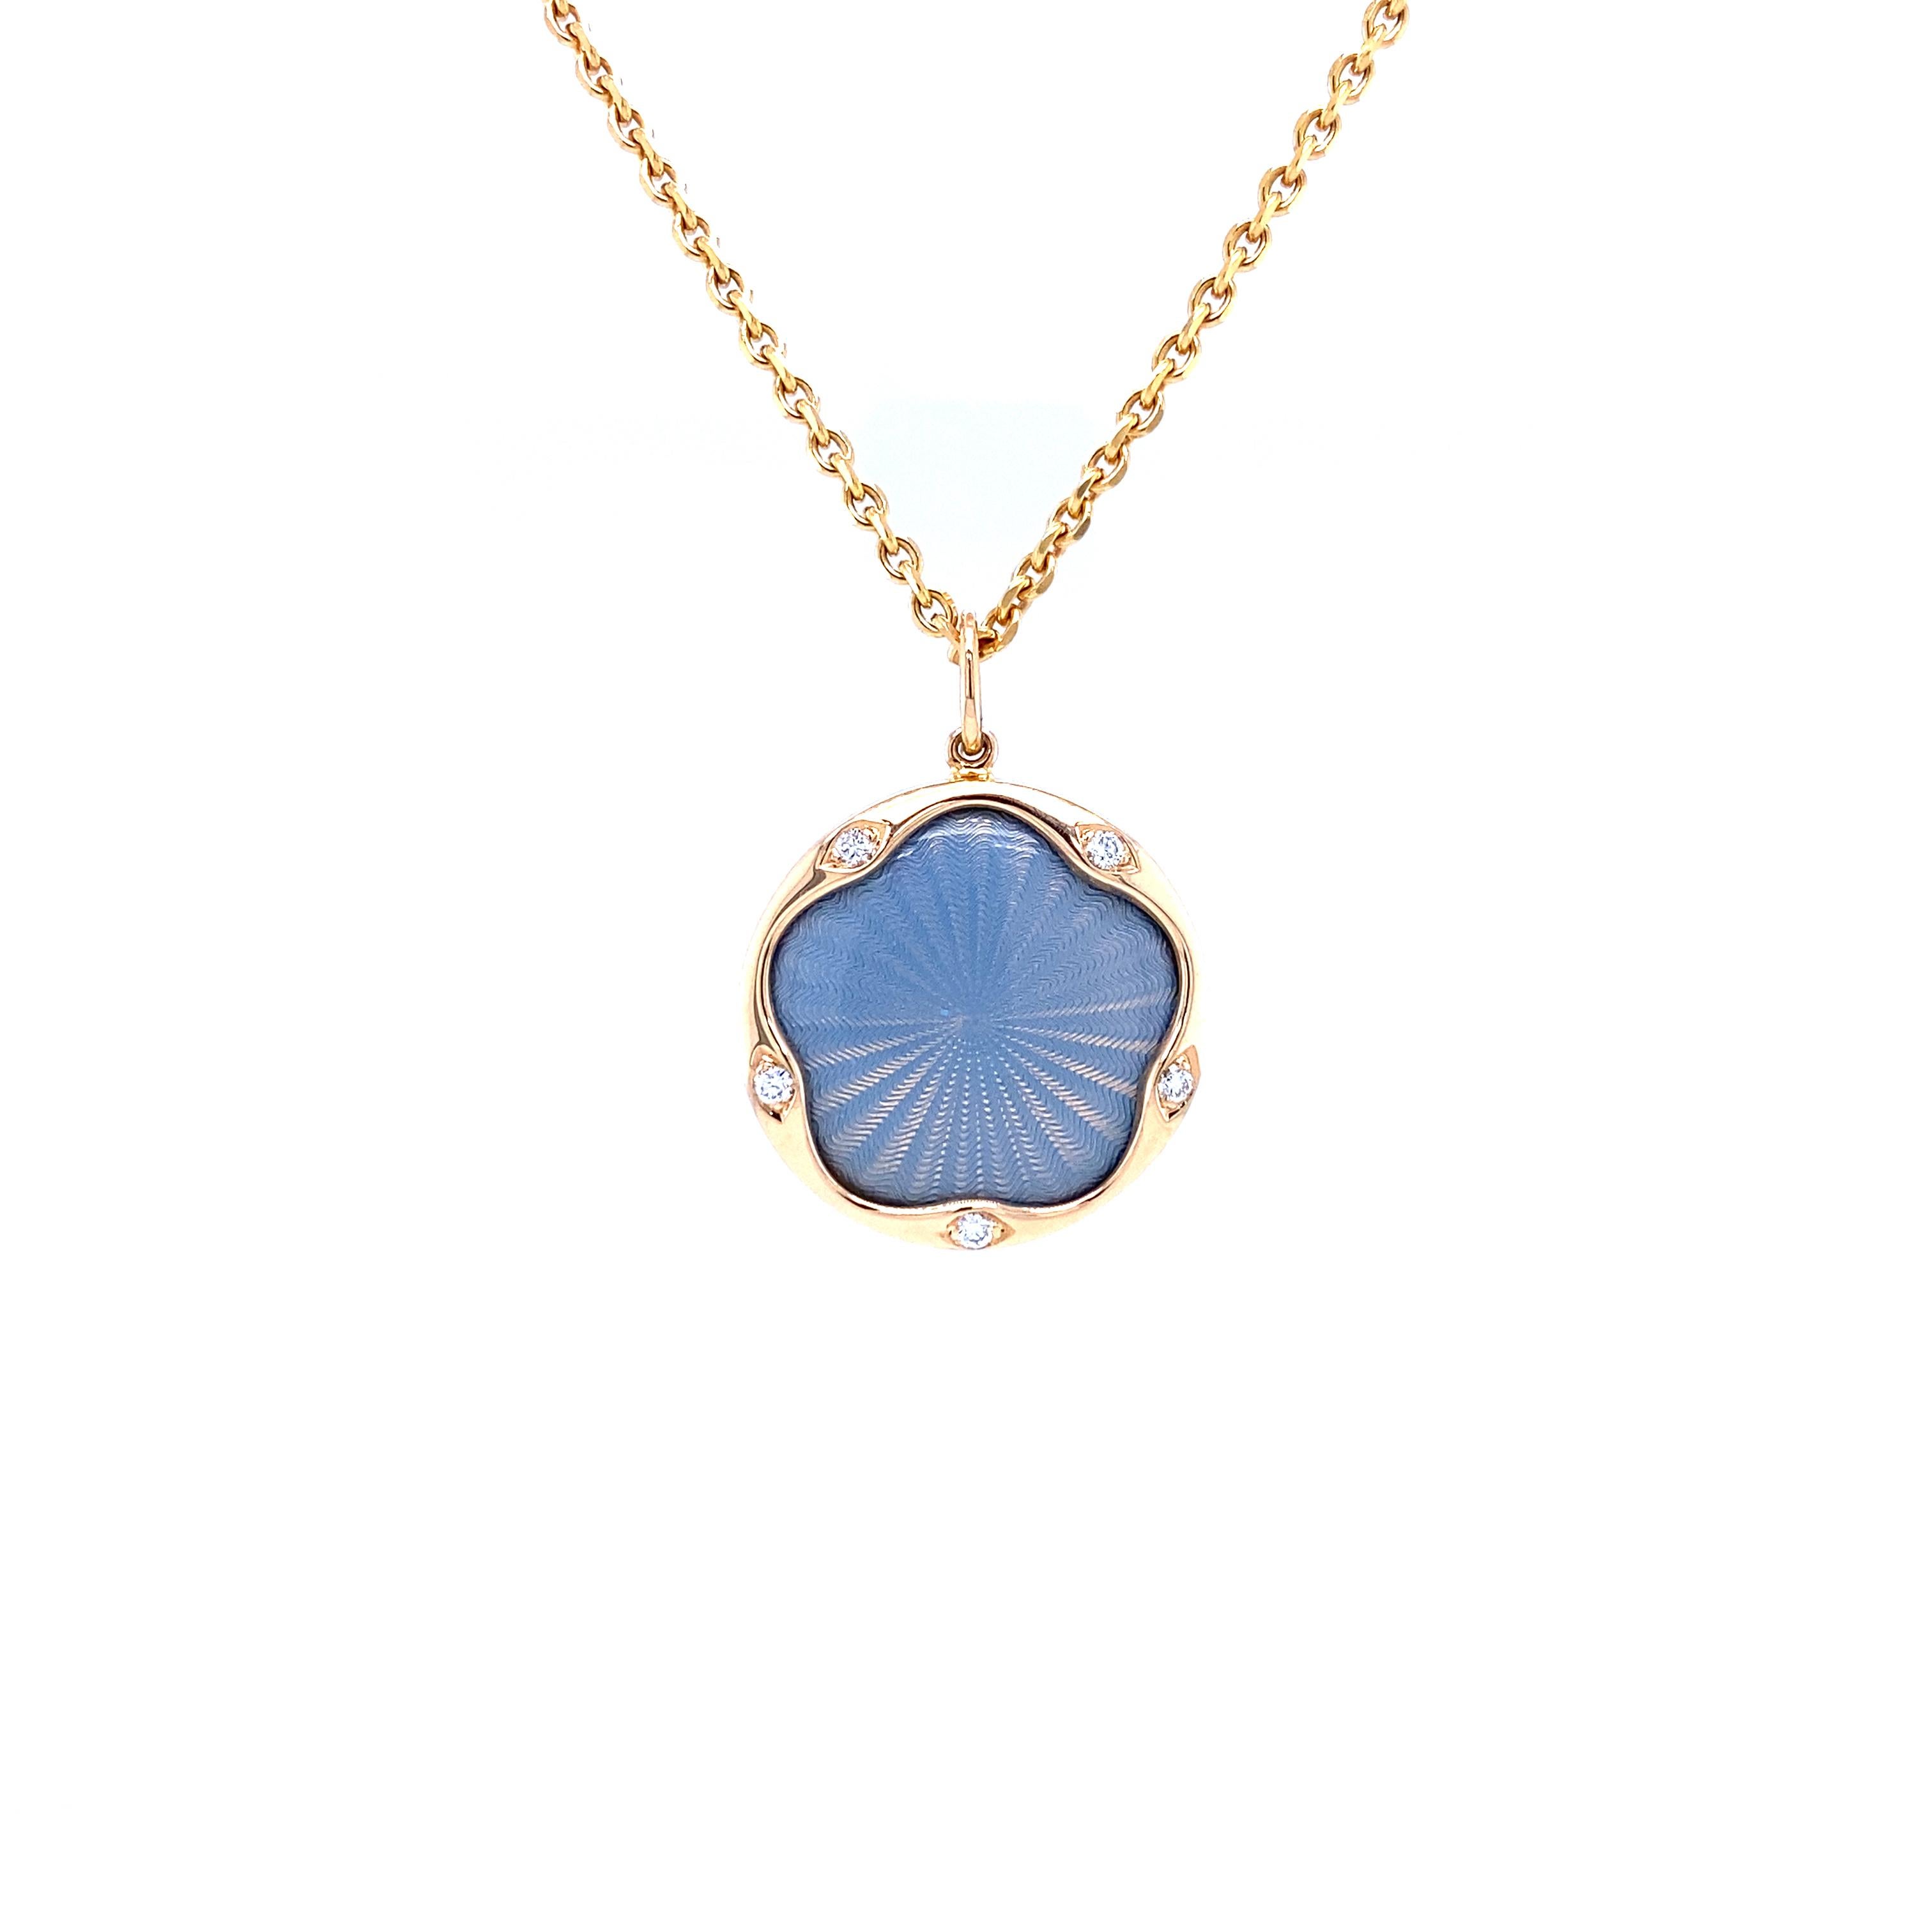 Victor Mayer round pendant 18k rose gold, Macaron Collection, translucent opalescent turquoise vitreous enamel, guilloche, 5 diamonds total 0.07 ct, G VS, brilliant cut, diameter app. 19.0 mm

About the creator Victor Mayer
Victor Mayer is